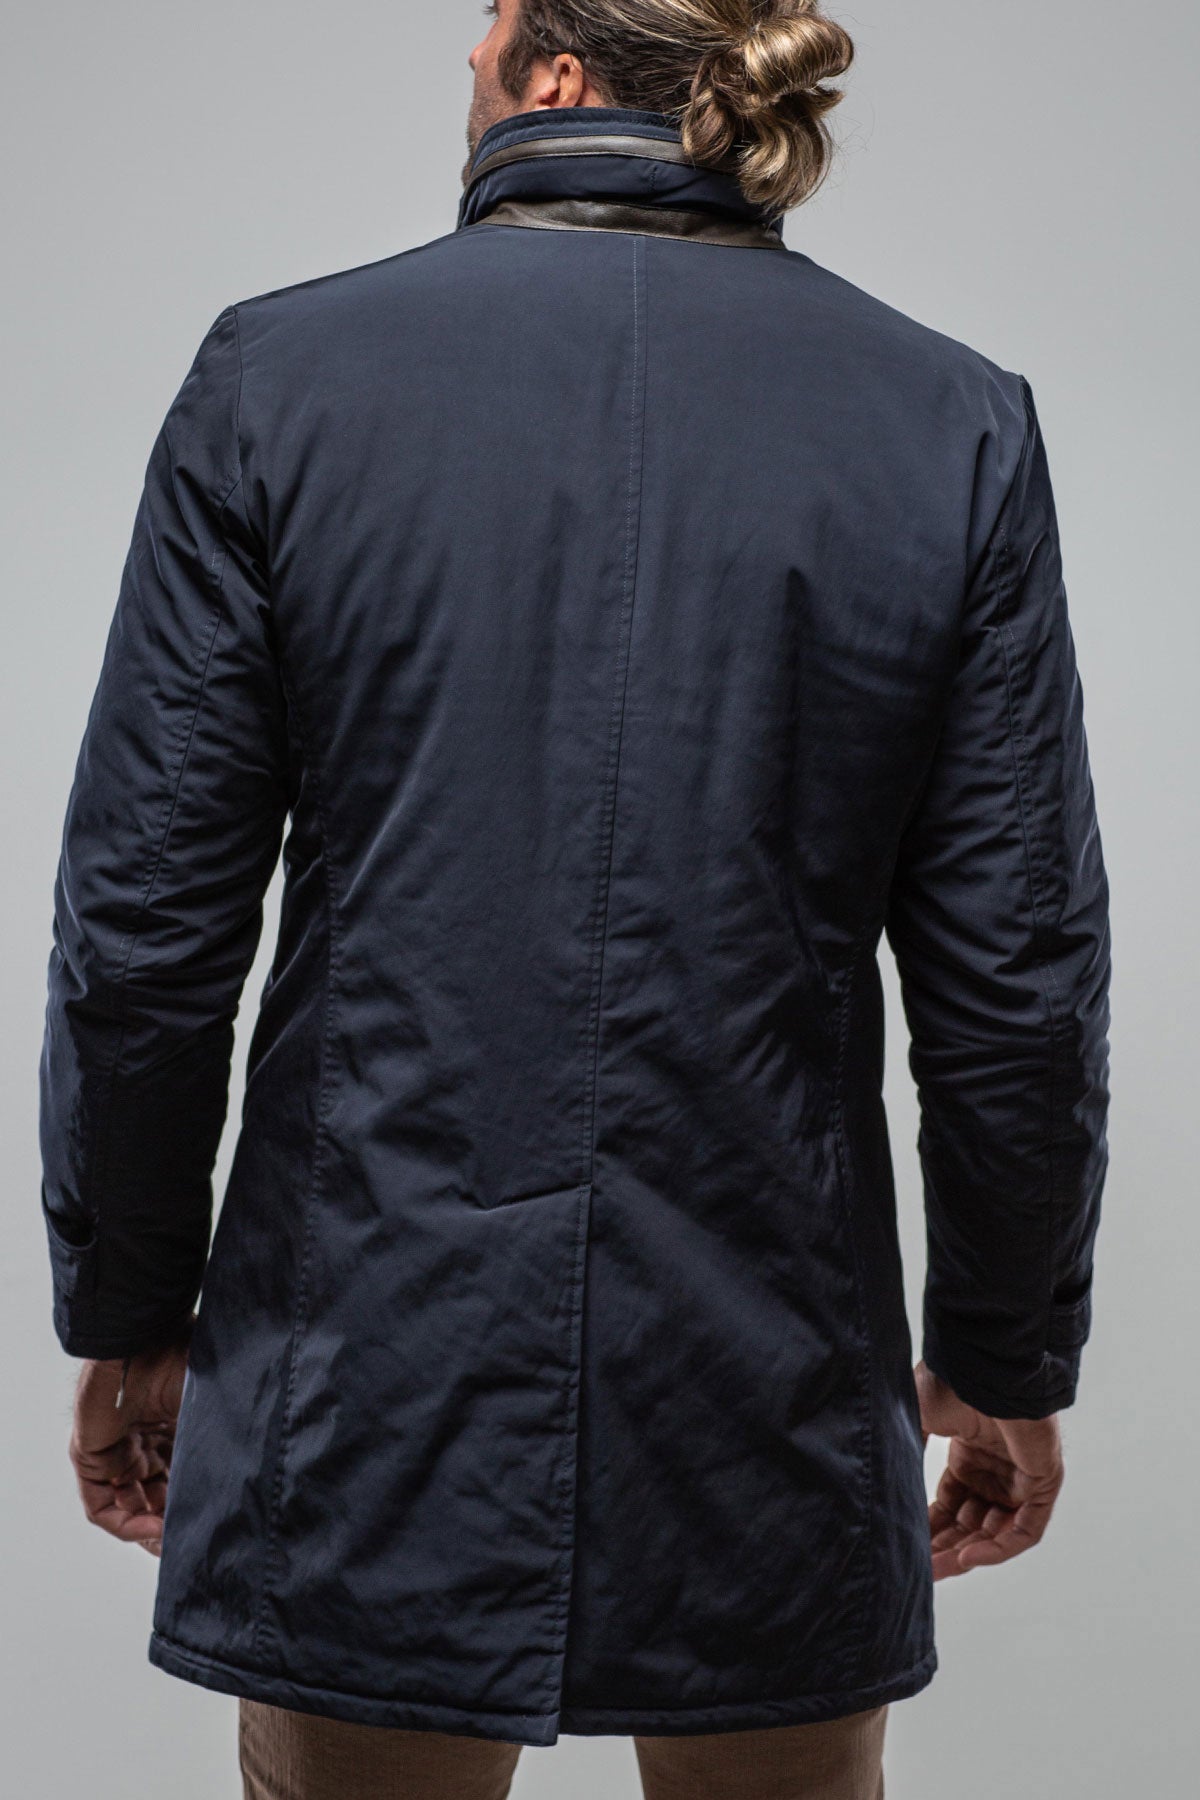 Kort Overcoat | Warehouse - Mens - Outerwear - Cloth | Gimo's